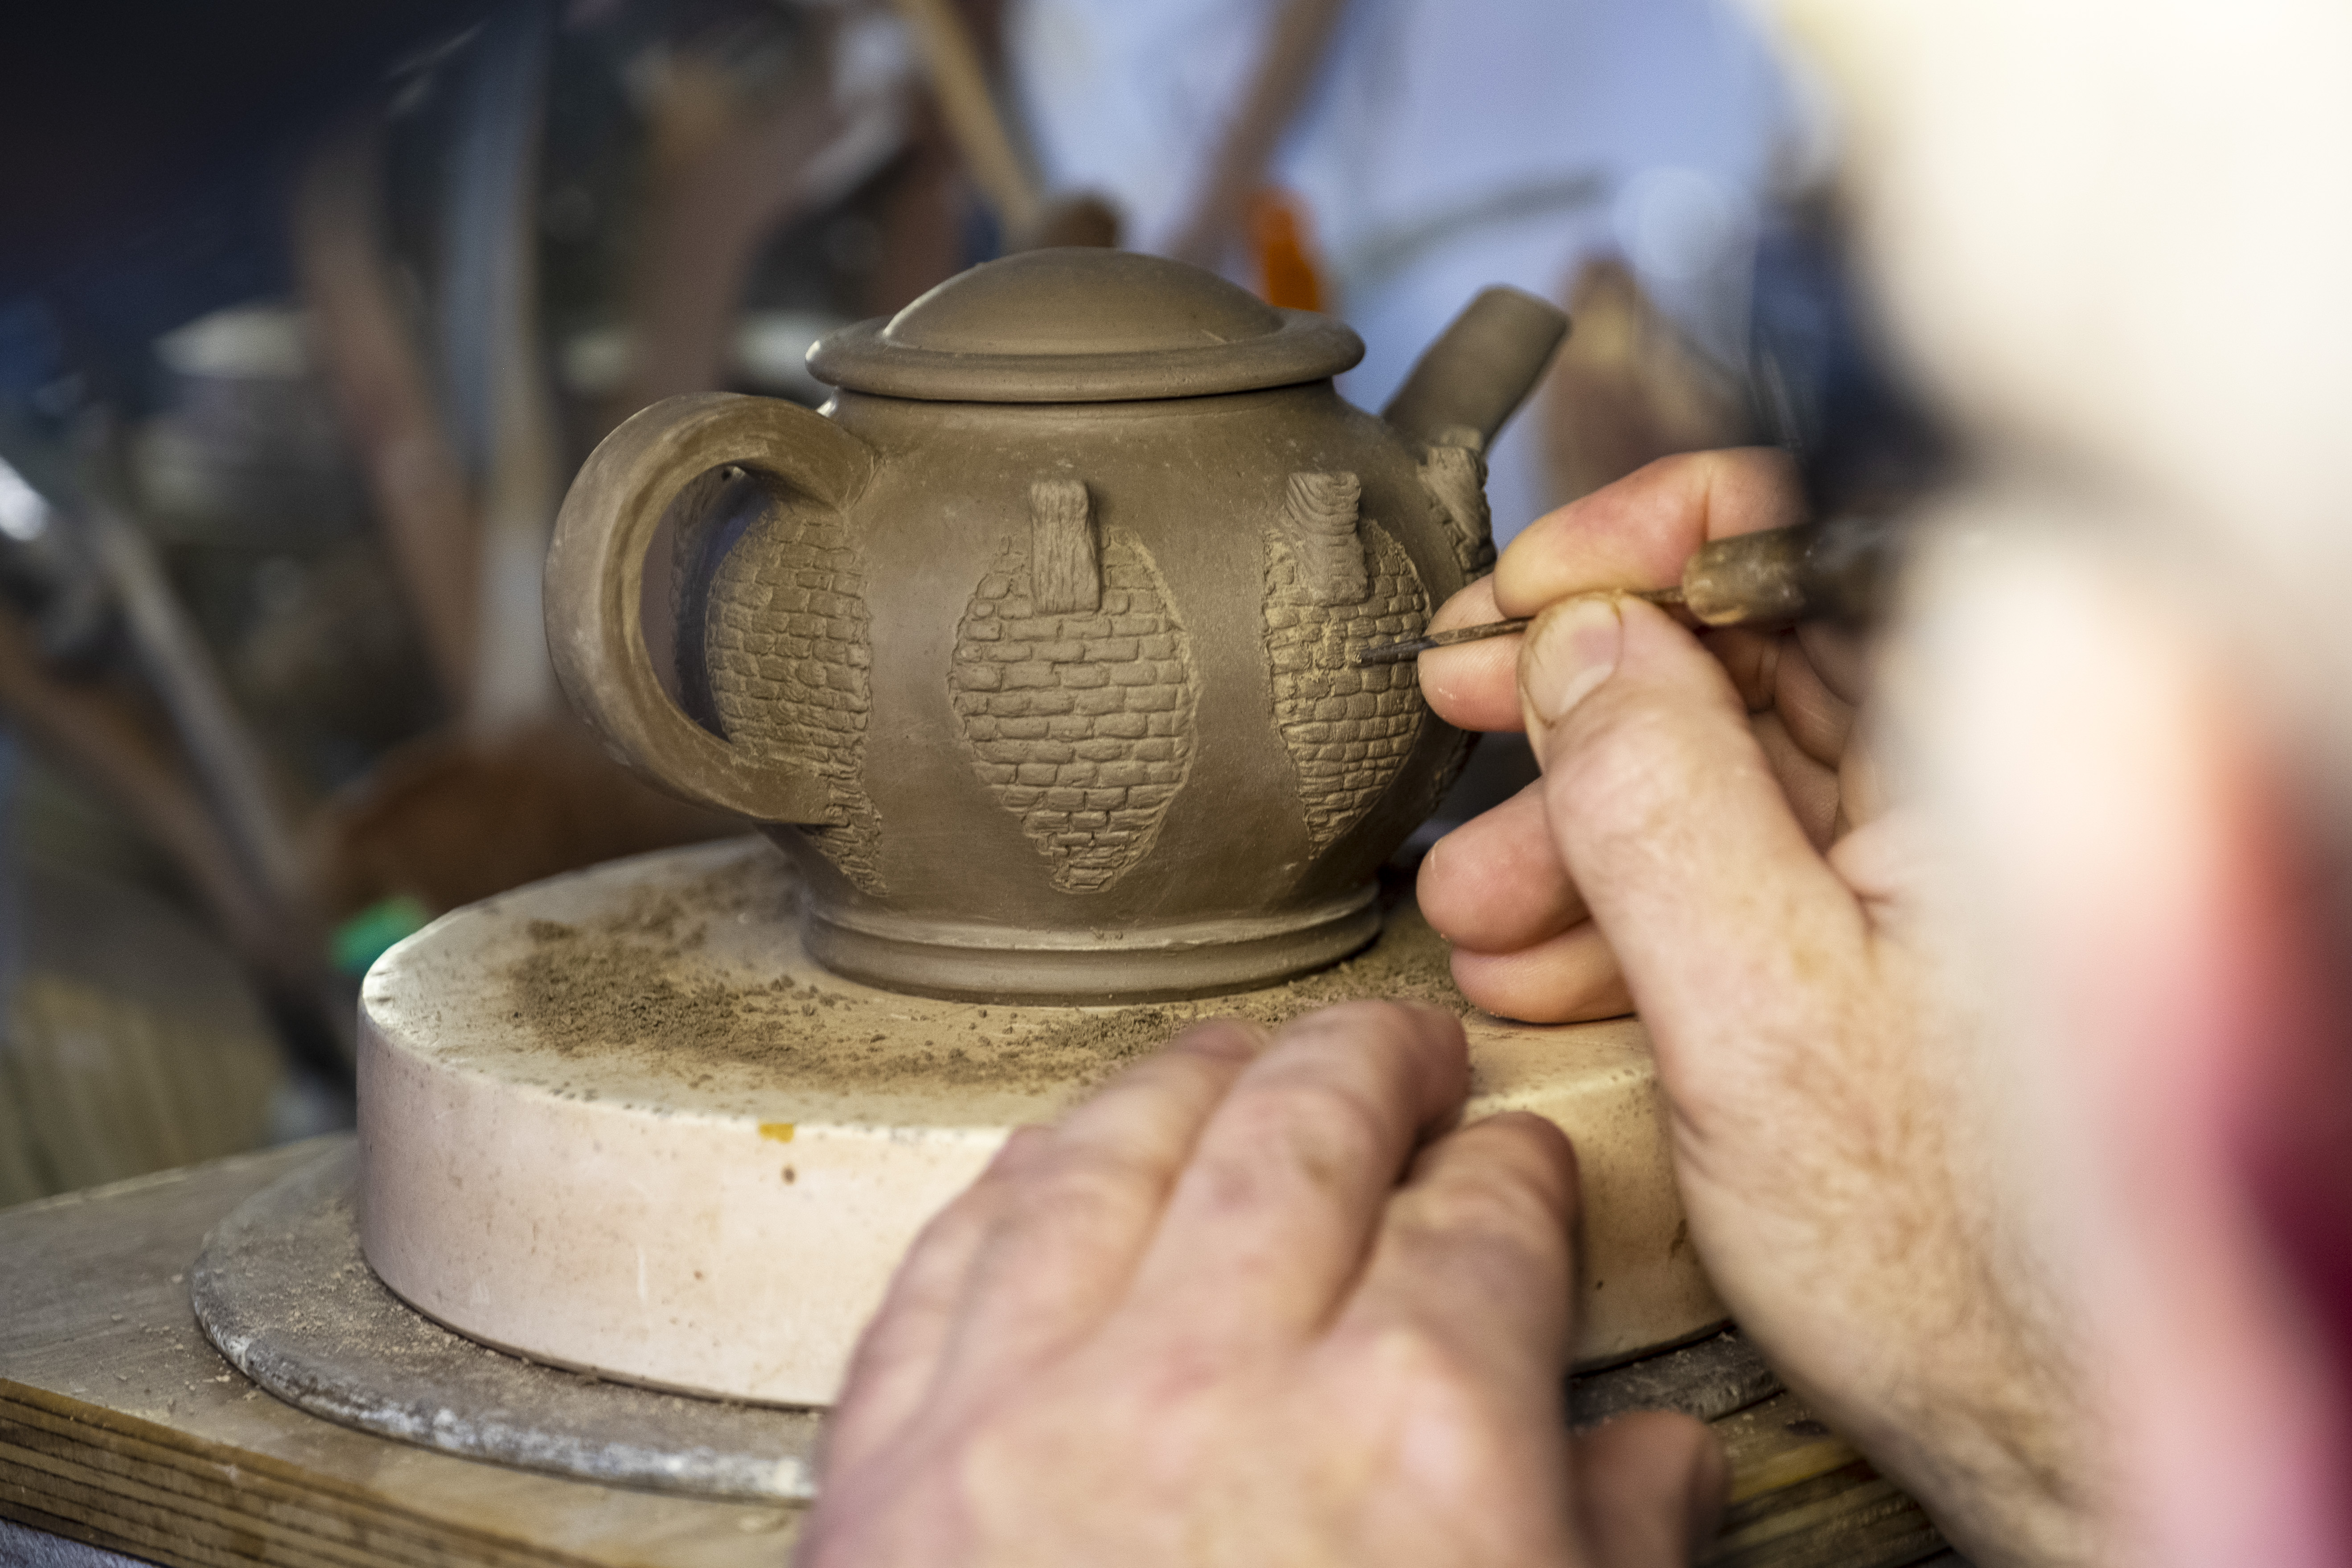 Two hands working on a piece of unfired clay pottery.